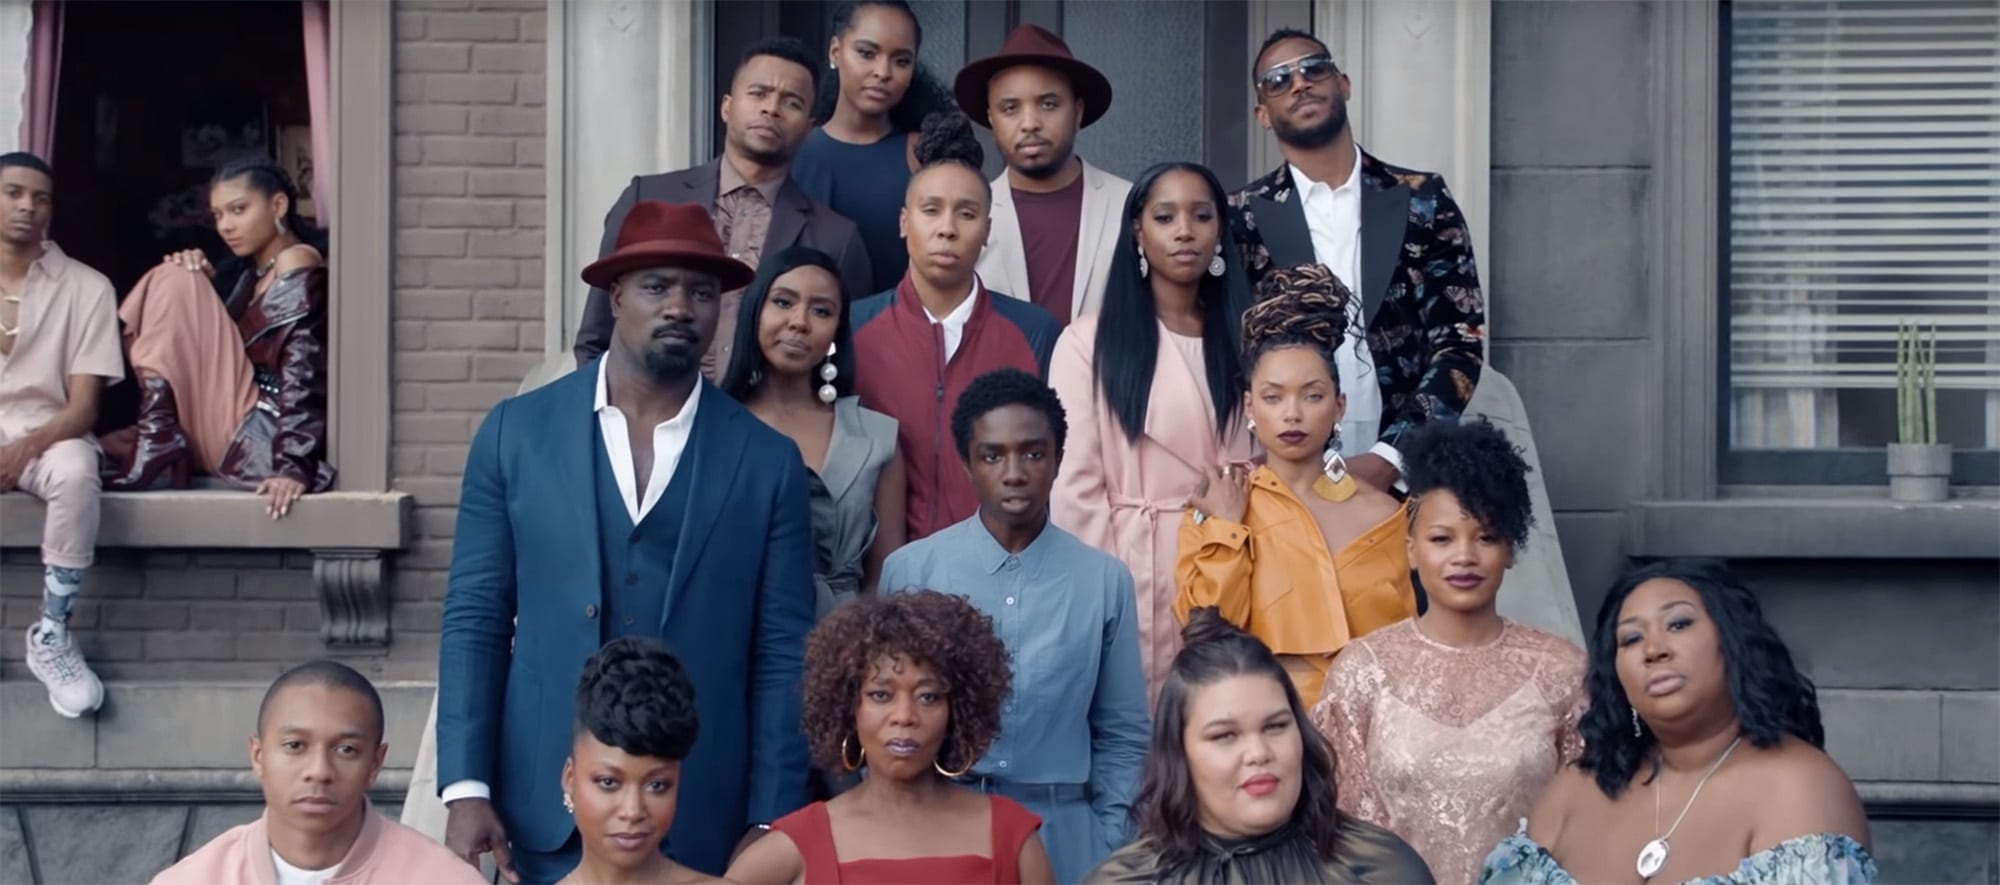 Last night, Netflix released a powerful and stirring commercial highlighting some of the incredibly talented black creatives working both in front of and behind the camera on many of the streaming giant’s originals.